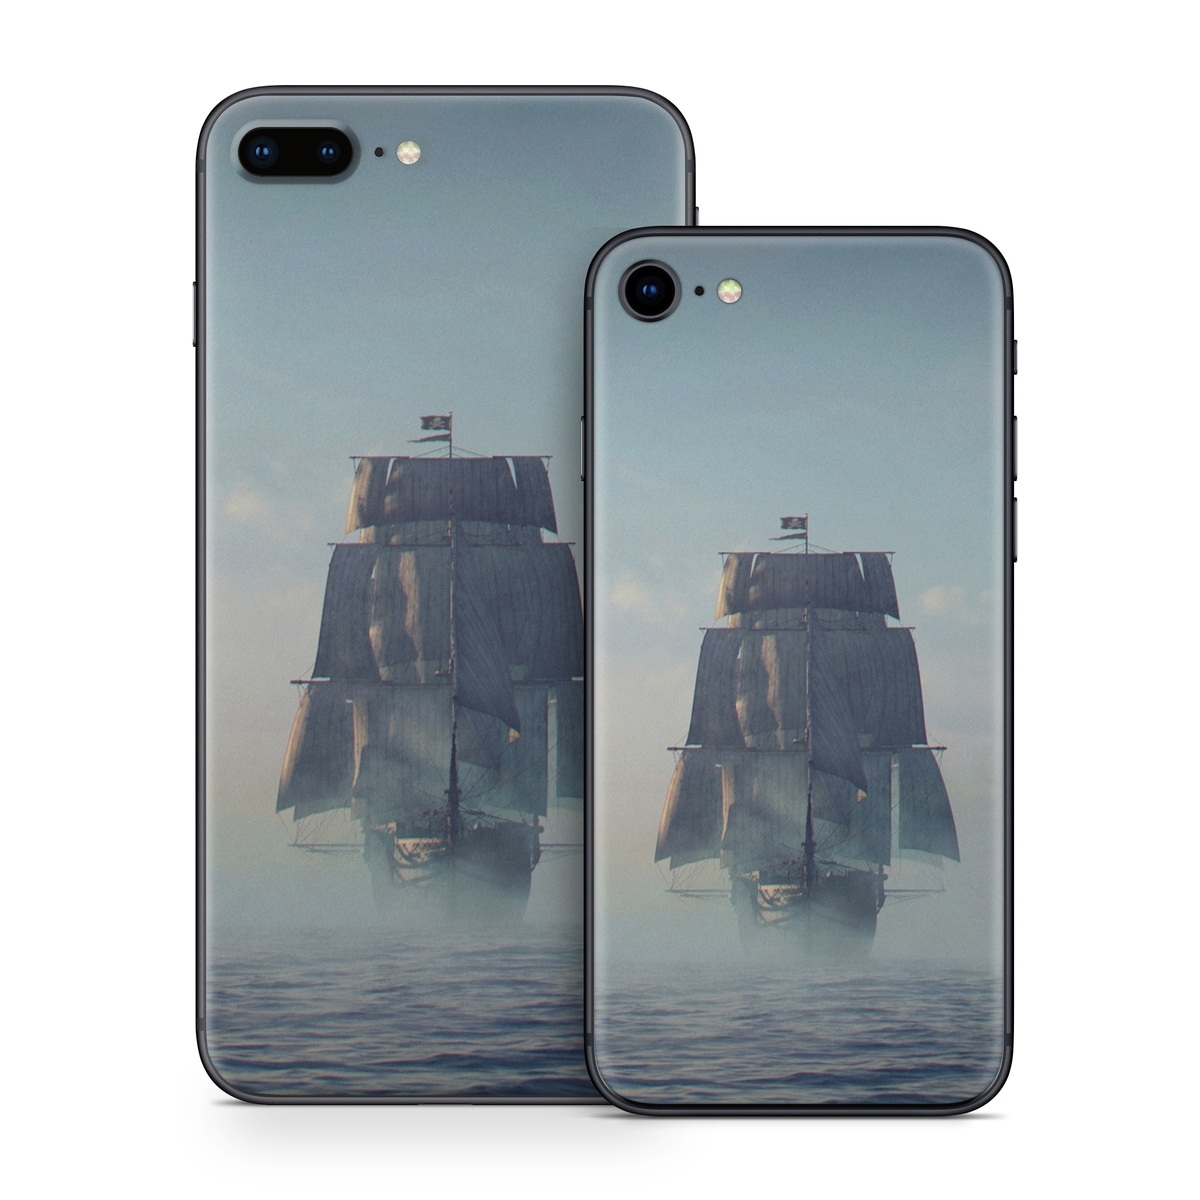 iPhone 8 Skin design of Atmospheric phenomenon, Vehicle, Mode of transport, Watercraft, Ship, Sea with white, blue, black, gray colors